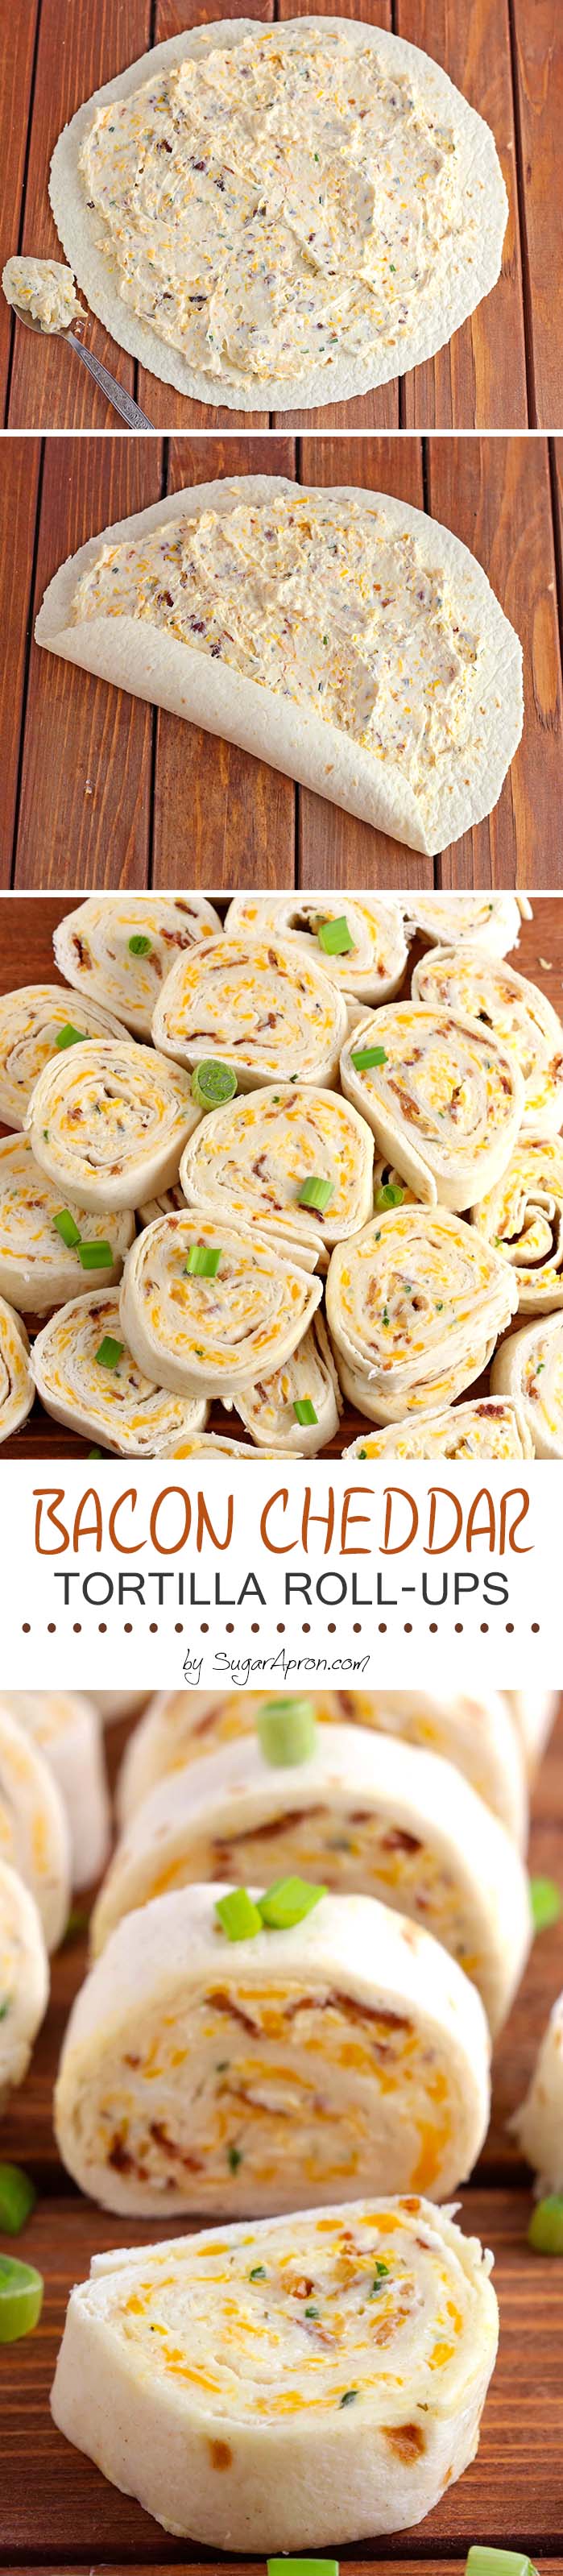 All you need is cream cheese, crumbled bacon (could even use bacon bits), cheddar cheese, ranch dressing, flour tortillas and 5 minutes.